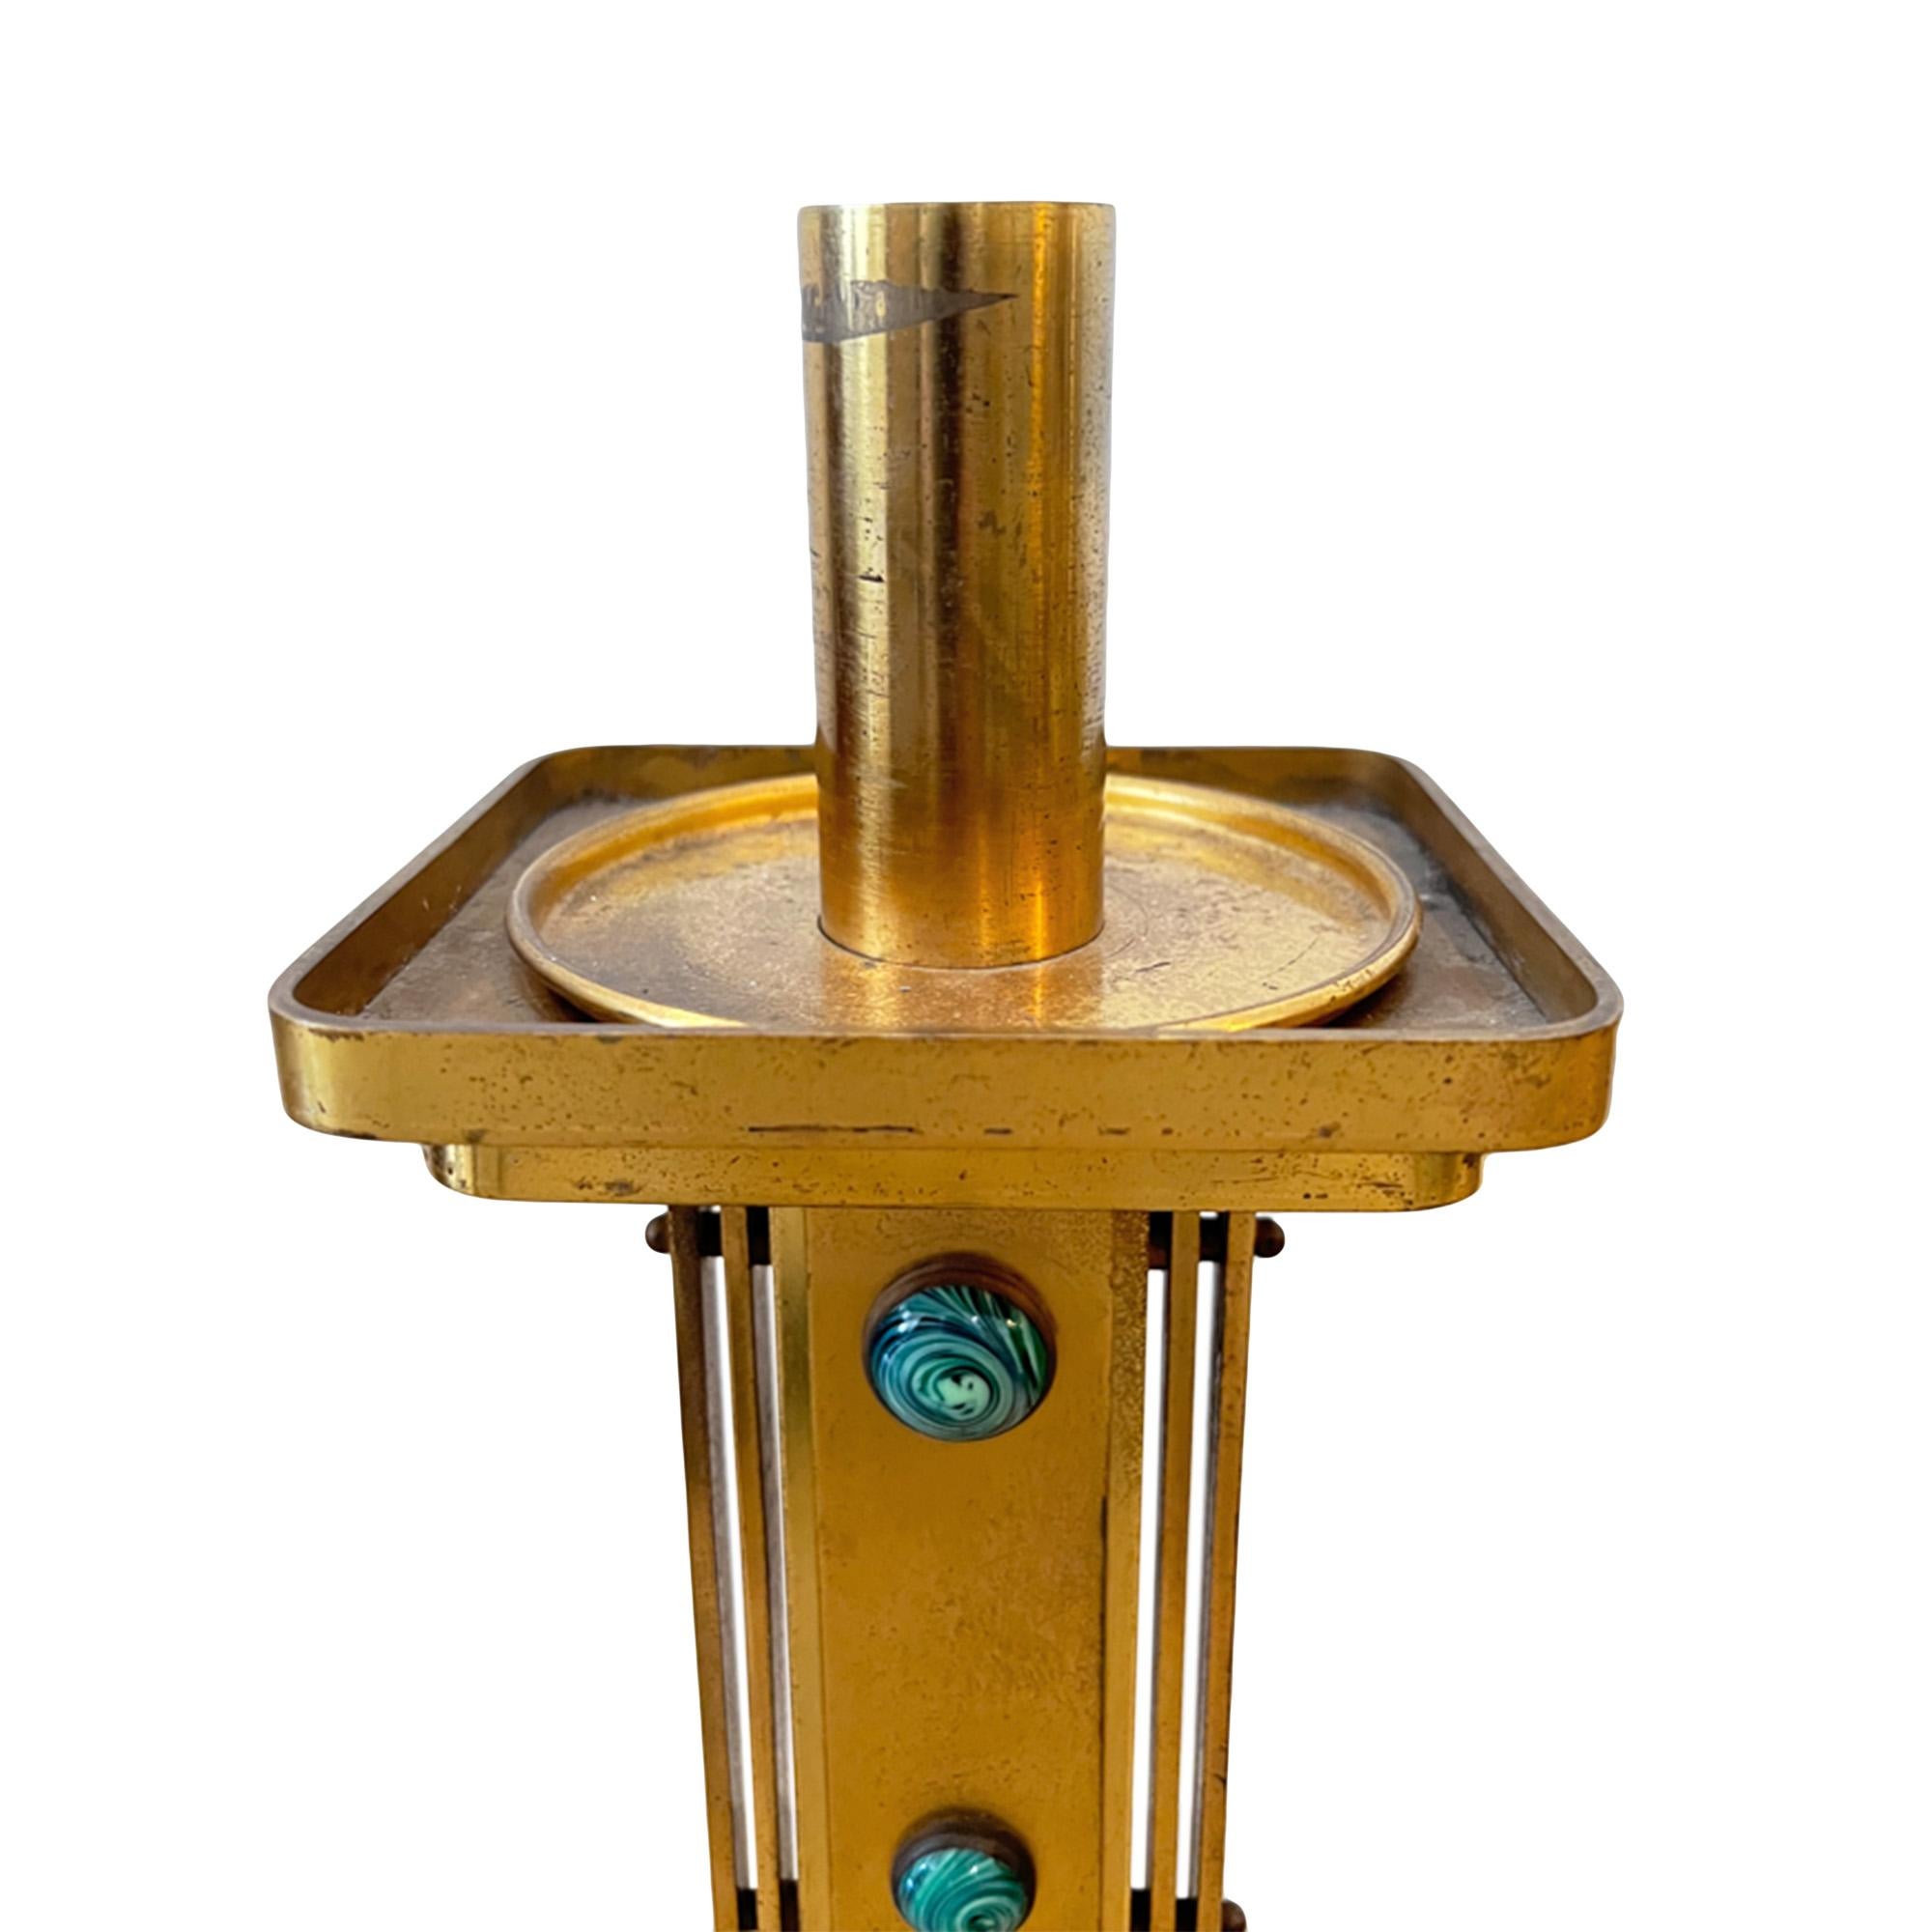 A great pair of guilded brass candlesticks decorated with attractive green malachite stones. The stones are larger at the top and decrease down in size as the design moves down the columns. 

Very decorative and practical - a lovely addition to a